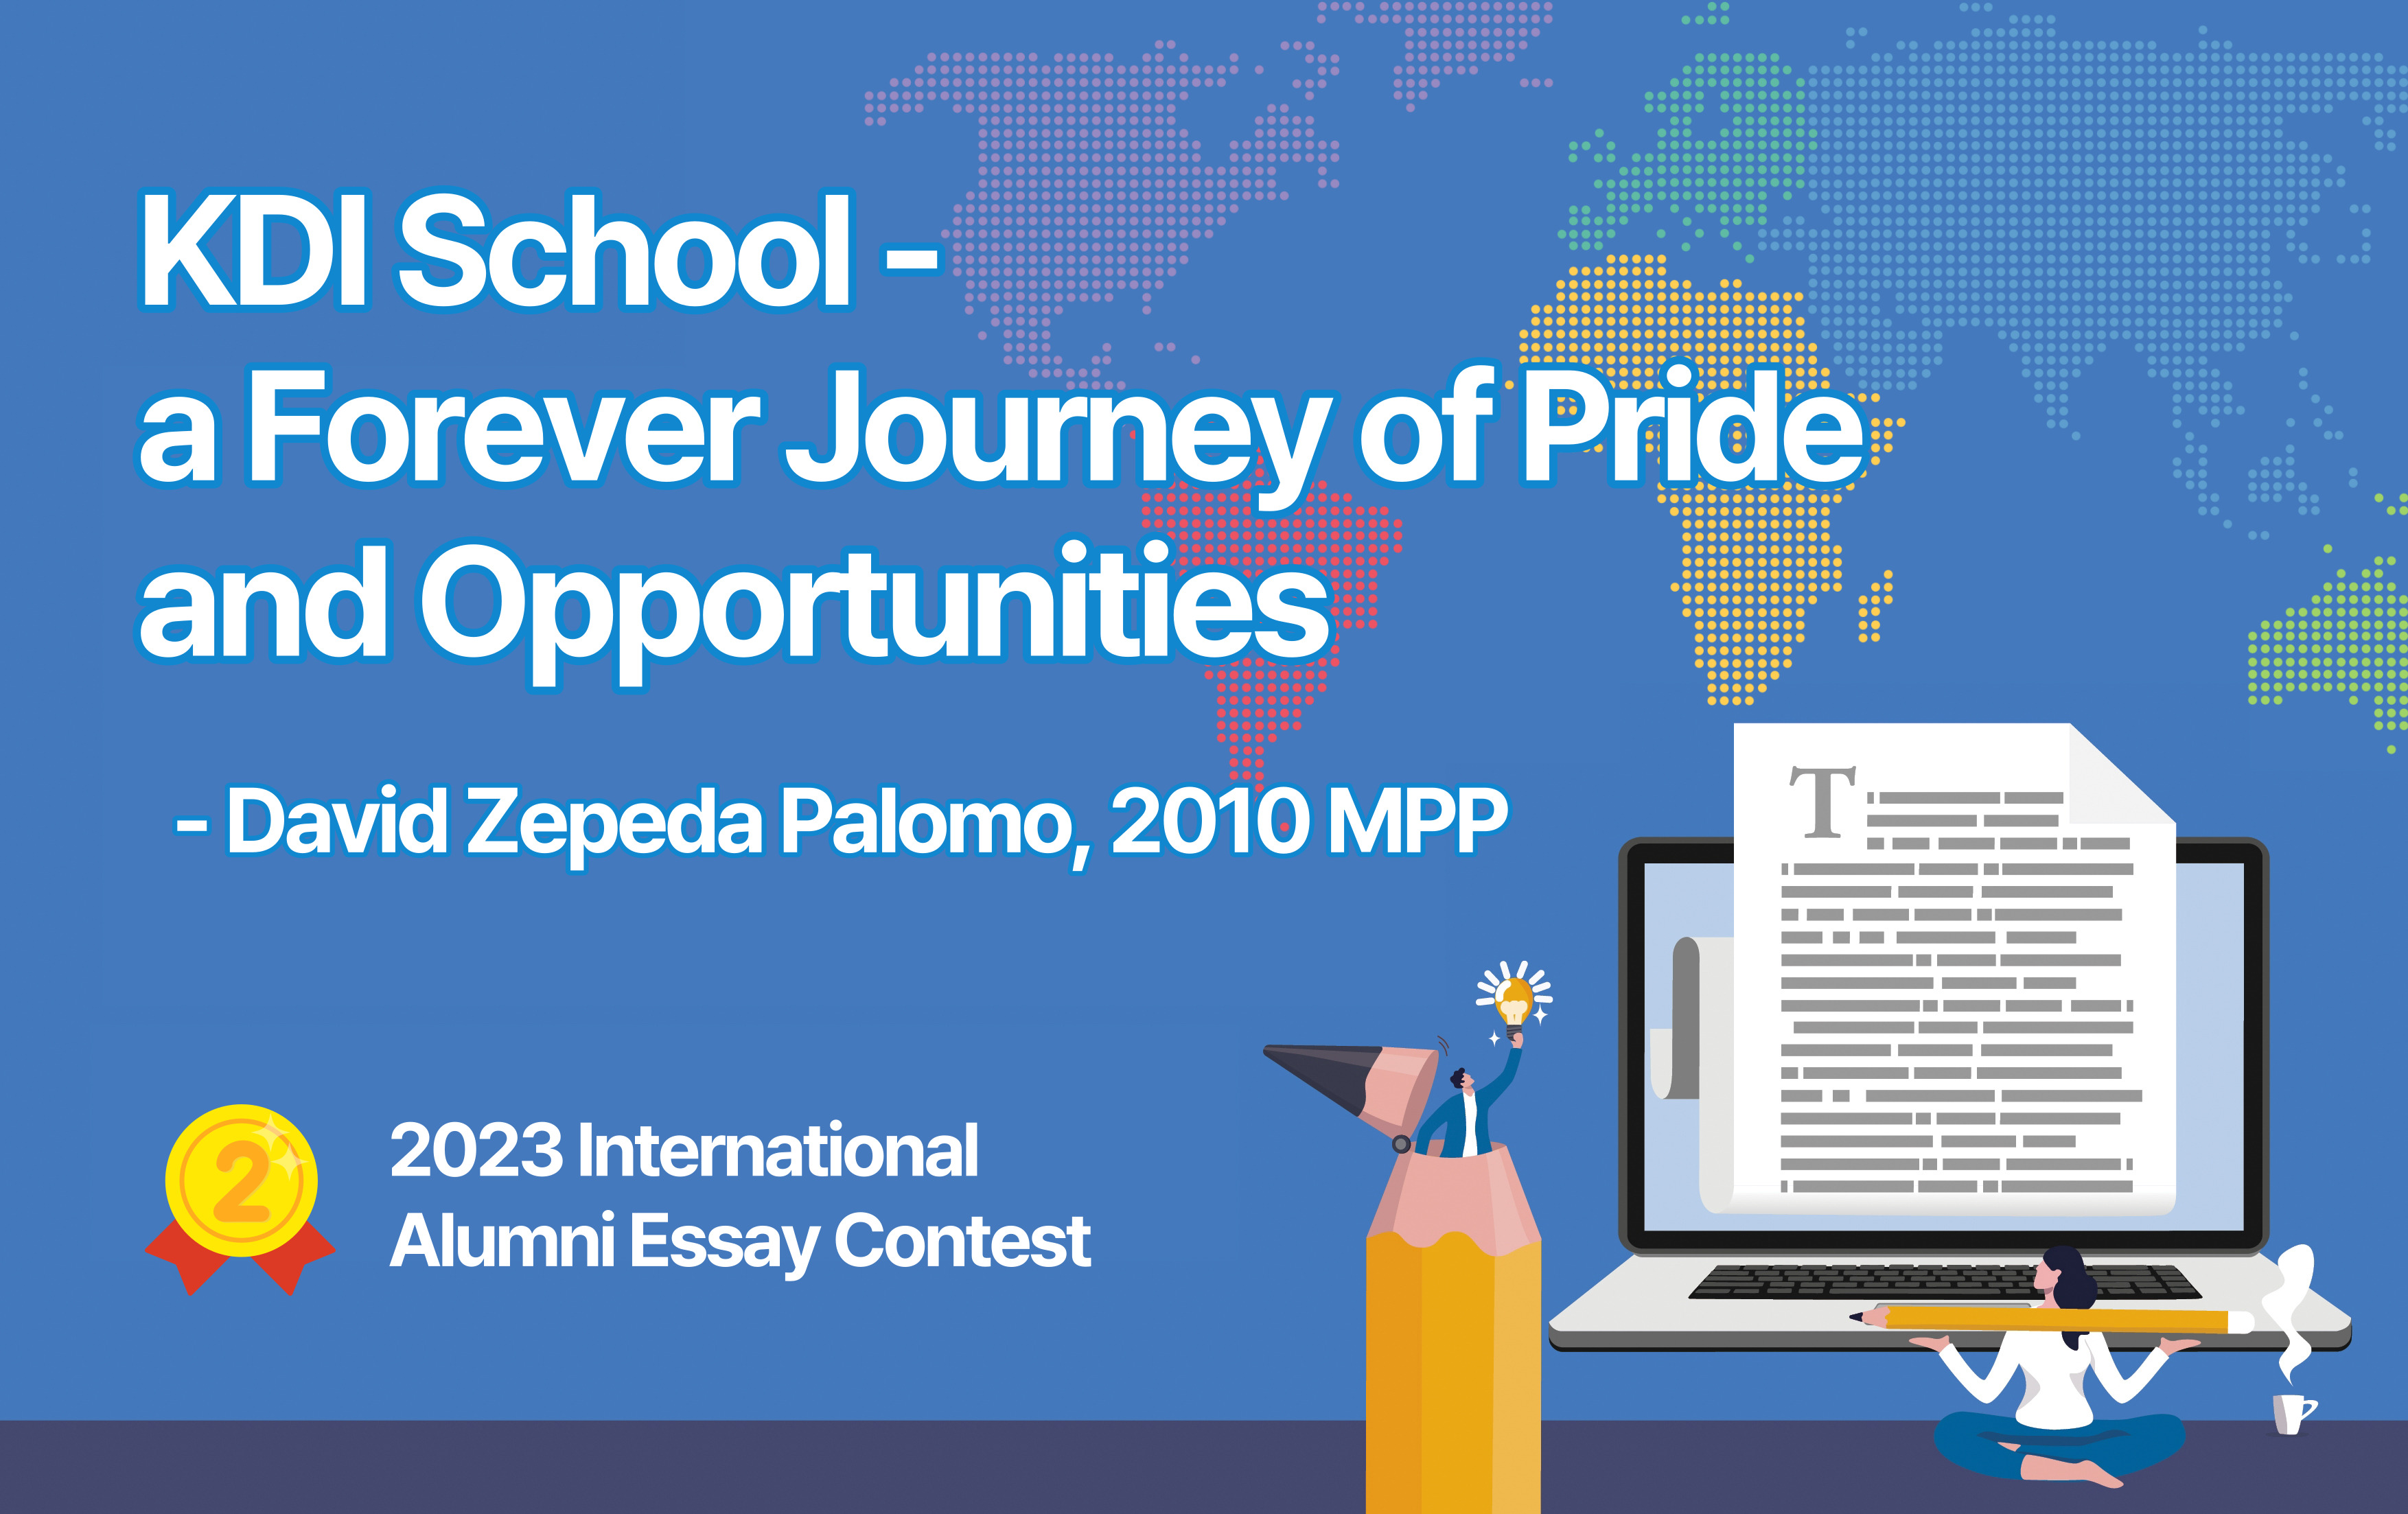 KDI School – A Forever Journey of Pride and Opportunities (David Zepeda Palomo, 2010 MPP)